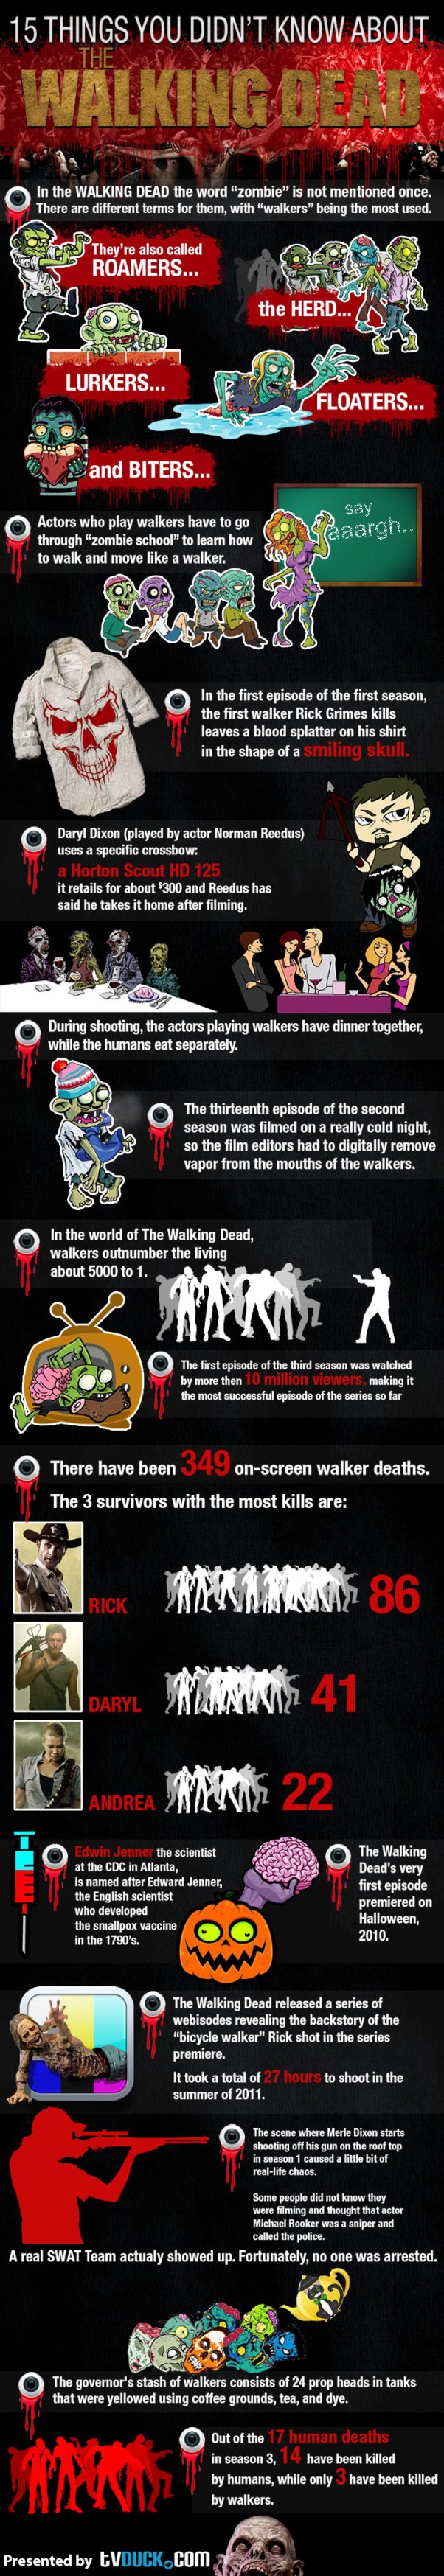 15-things-you-didnt-know-about-the-walking-dead